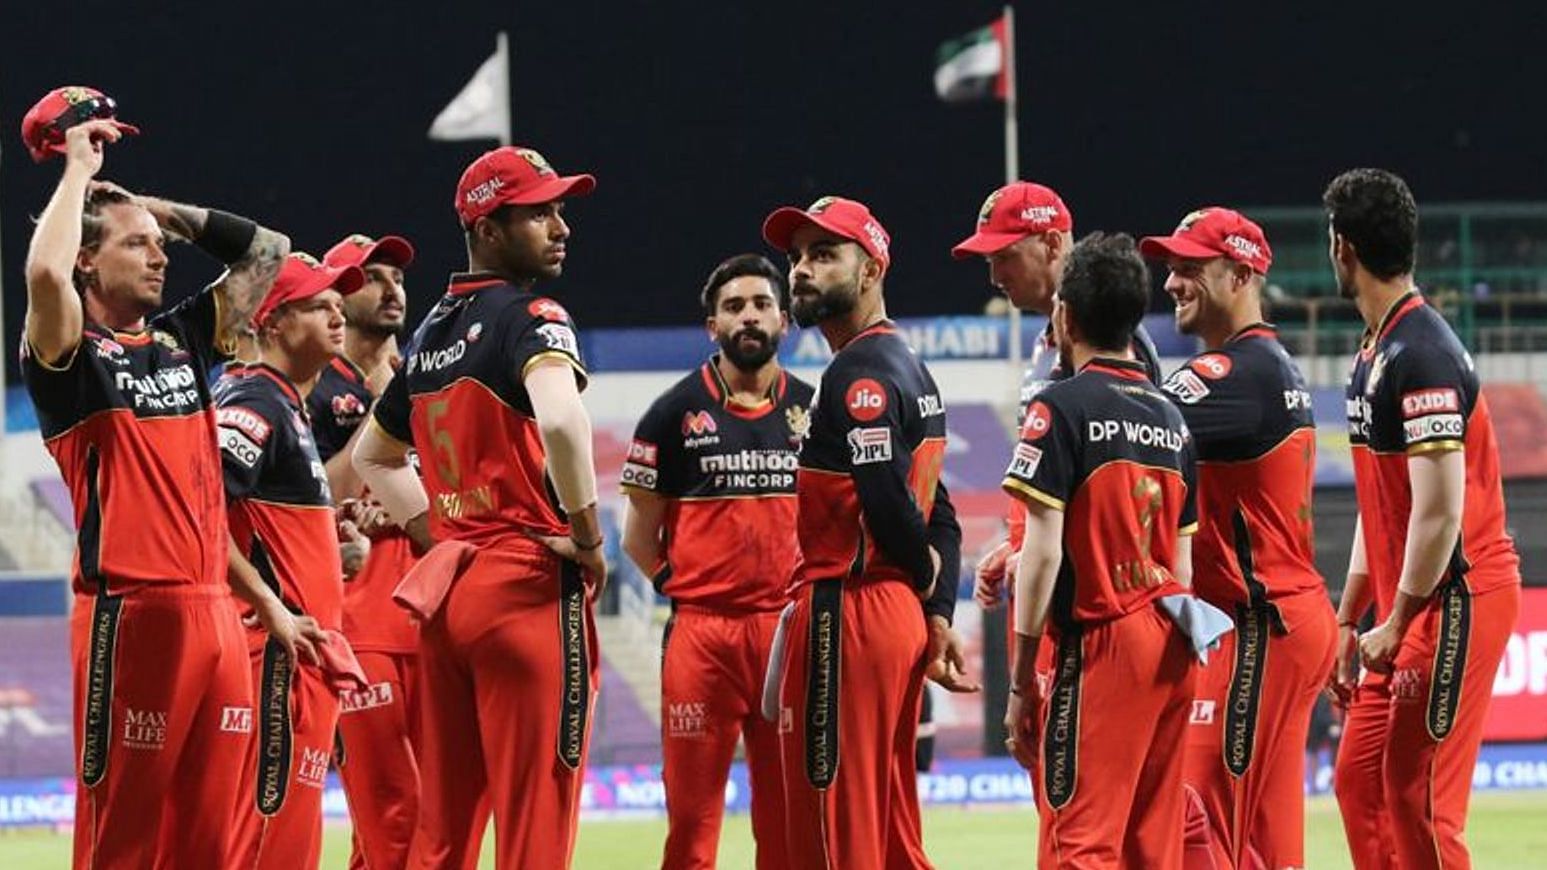 Royal Challengers Bangalore qualified for the playoffs in IPL 2020 even after four straight losses.